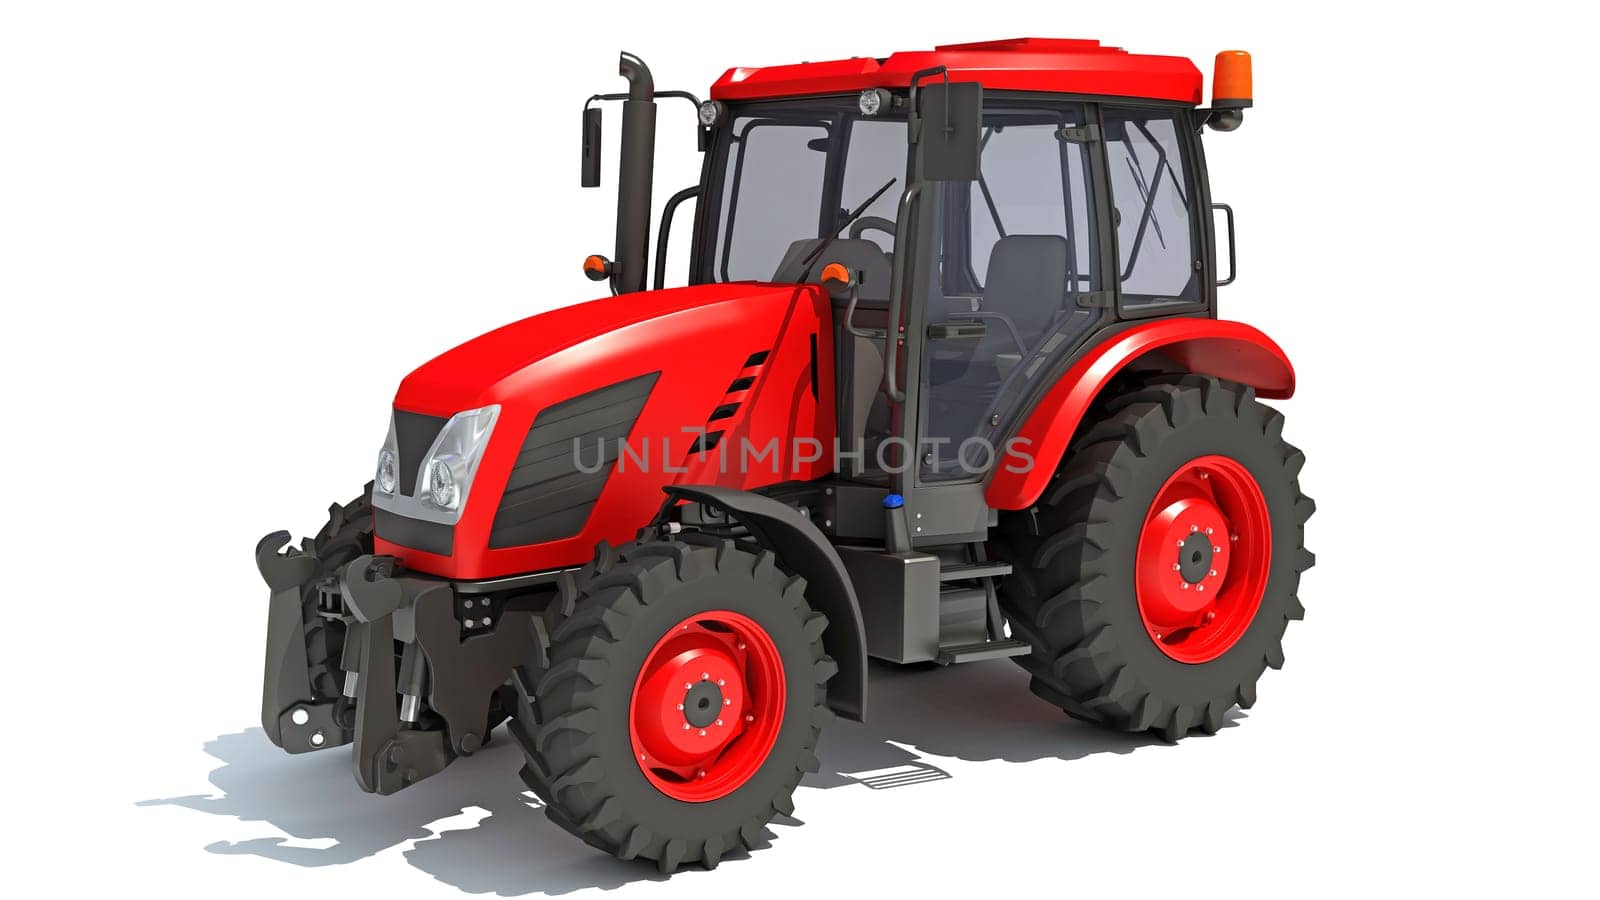 Farm Tractor 3D rendering model on white background